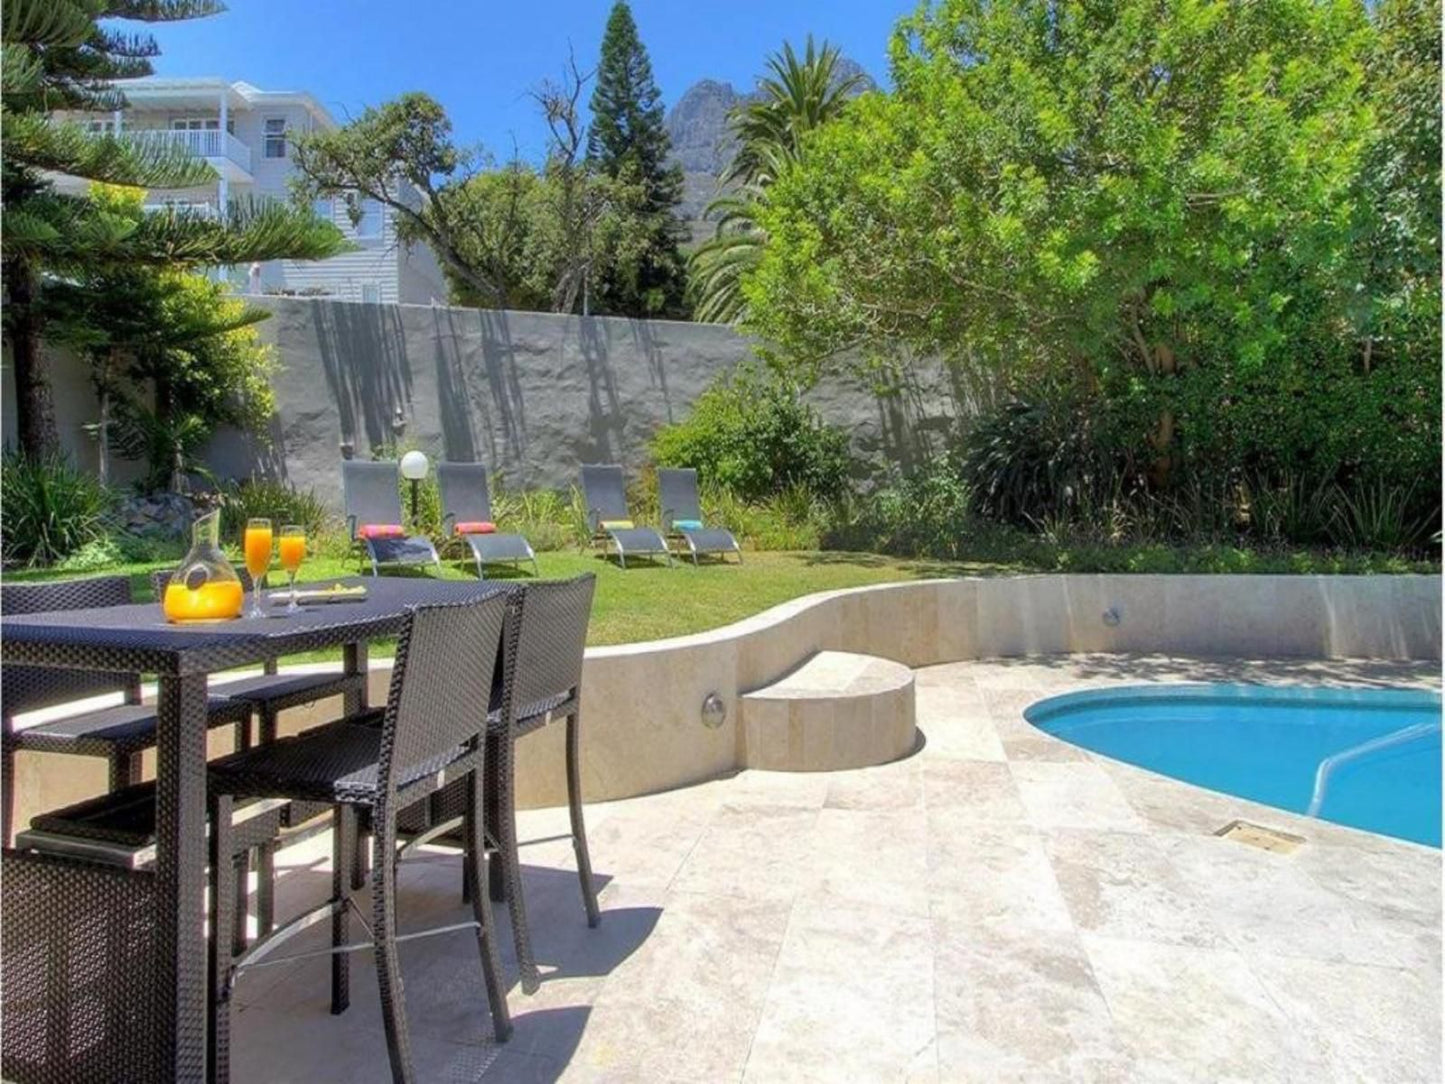 Vetho Villa Camps Bay Cape Town Western Cape South Africa Palm Tree, Plant, Nature, Wood, Garden, Swimming Pool